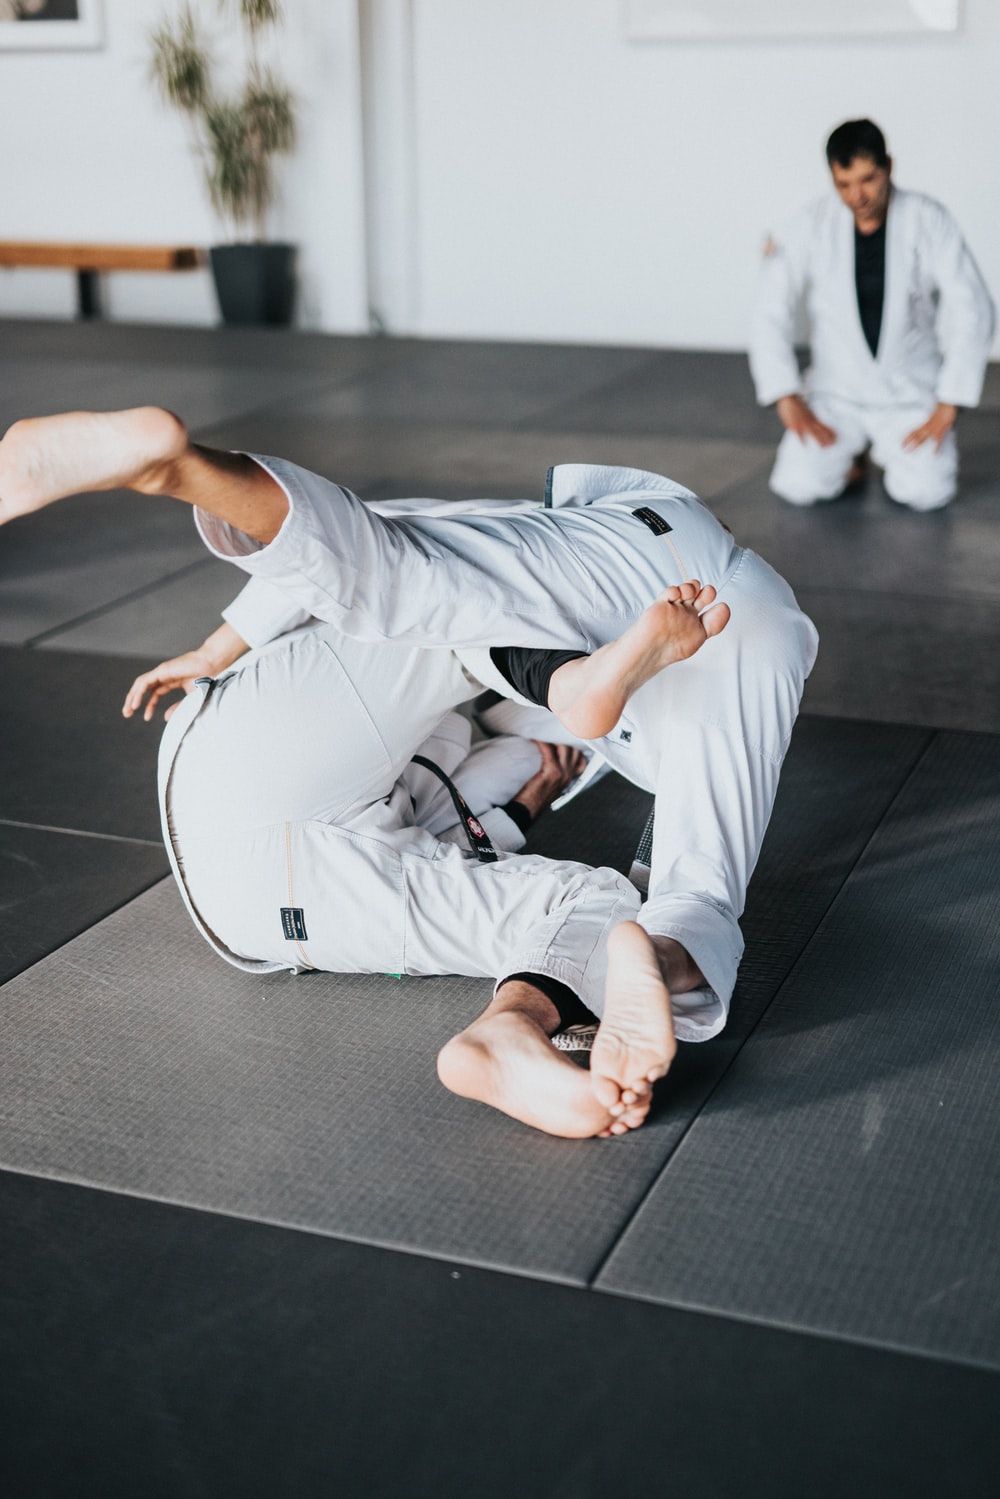 Judo Picture [HD]. Download Free Image